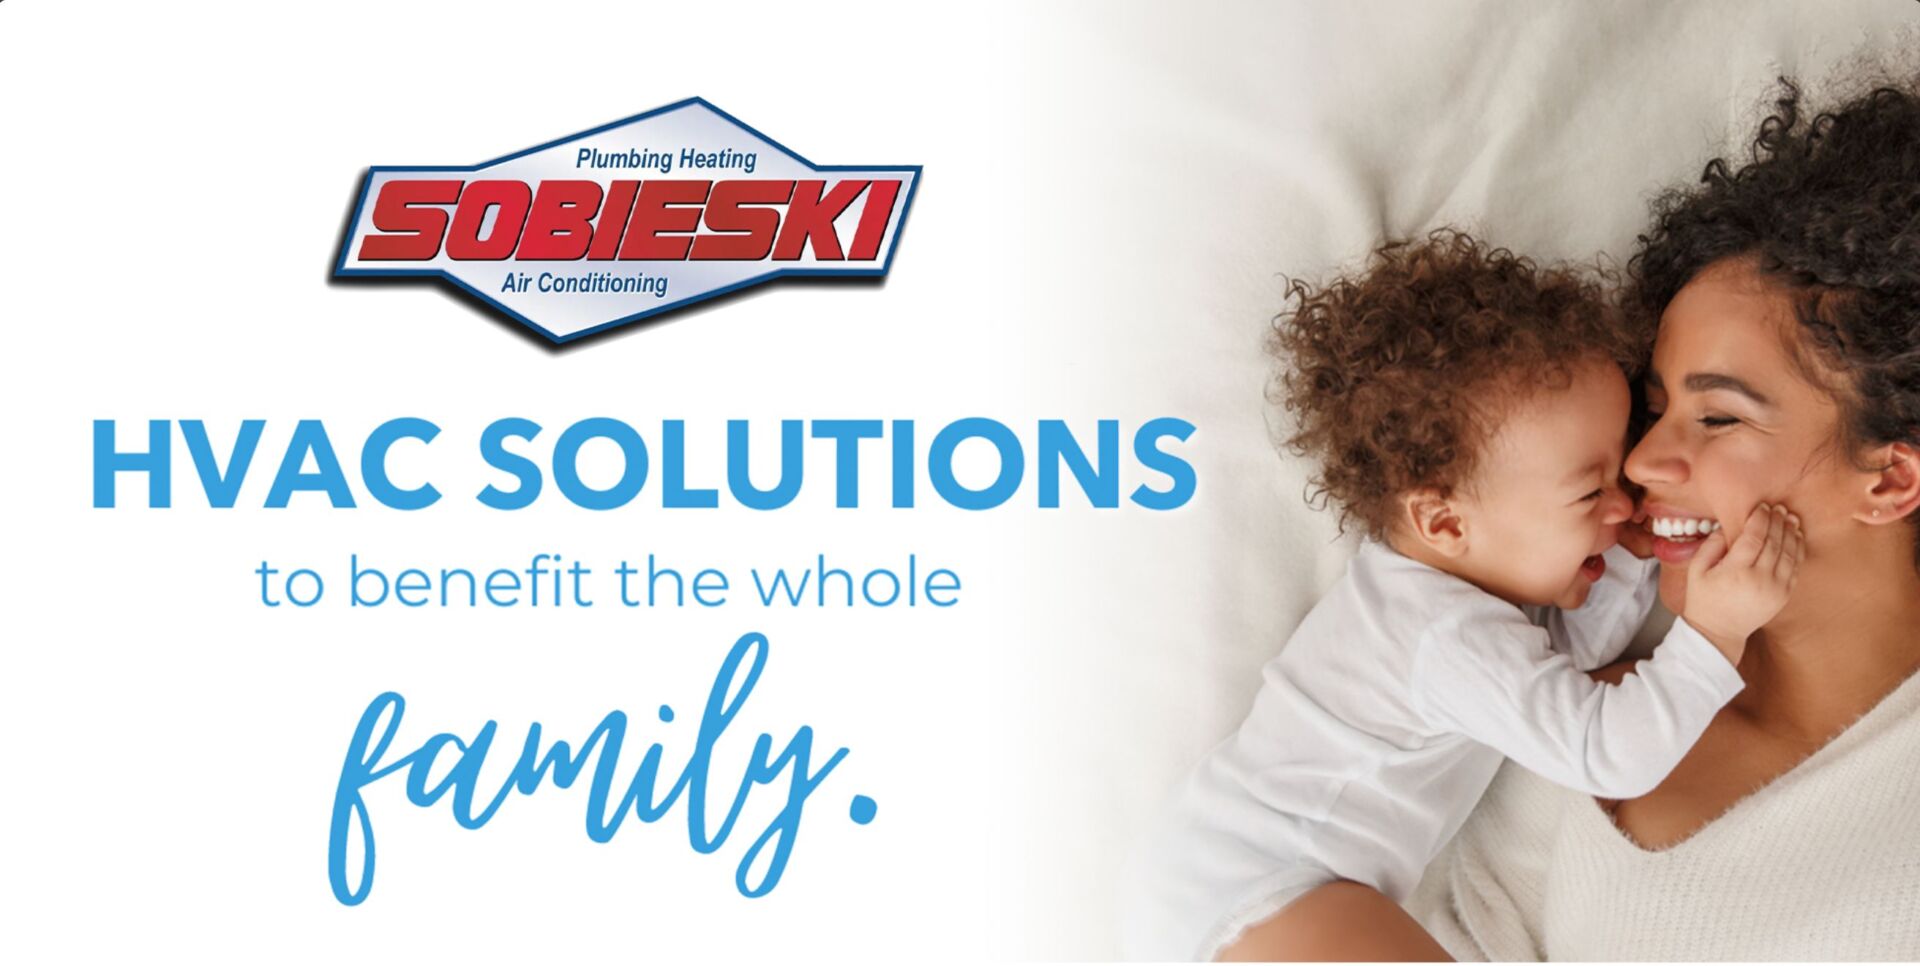 HVAC Solutions to benefit the whole family